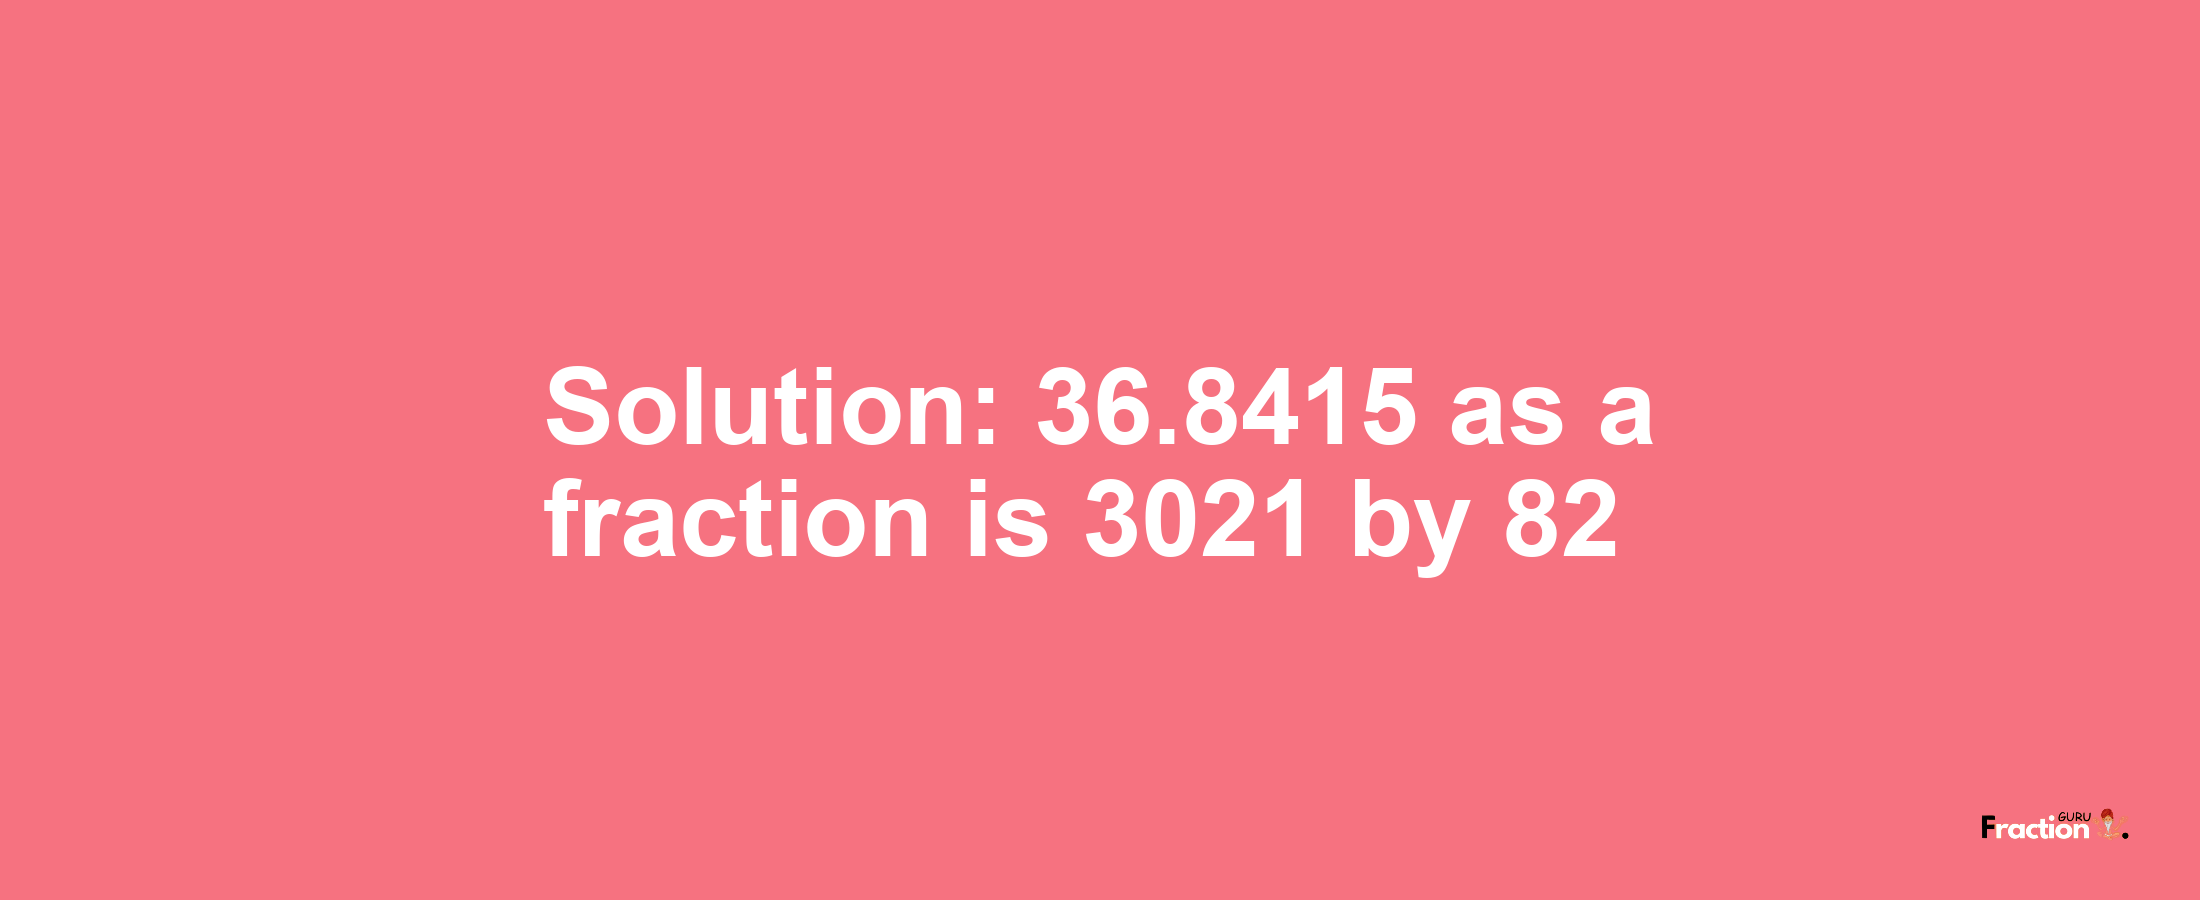 Solution:36.8415 as a fraction is 3021/82